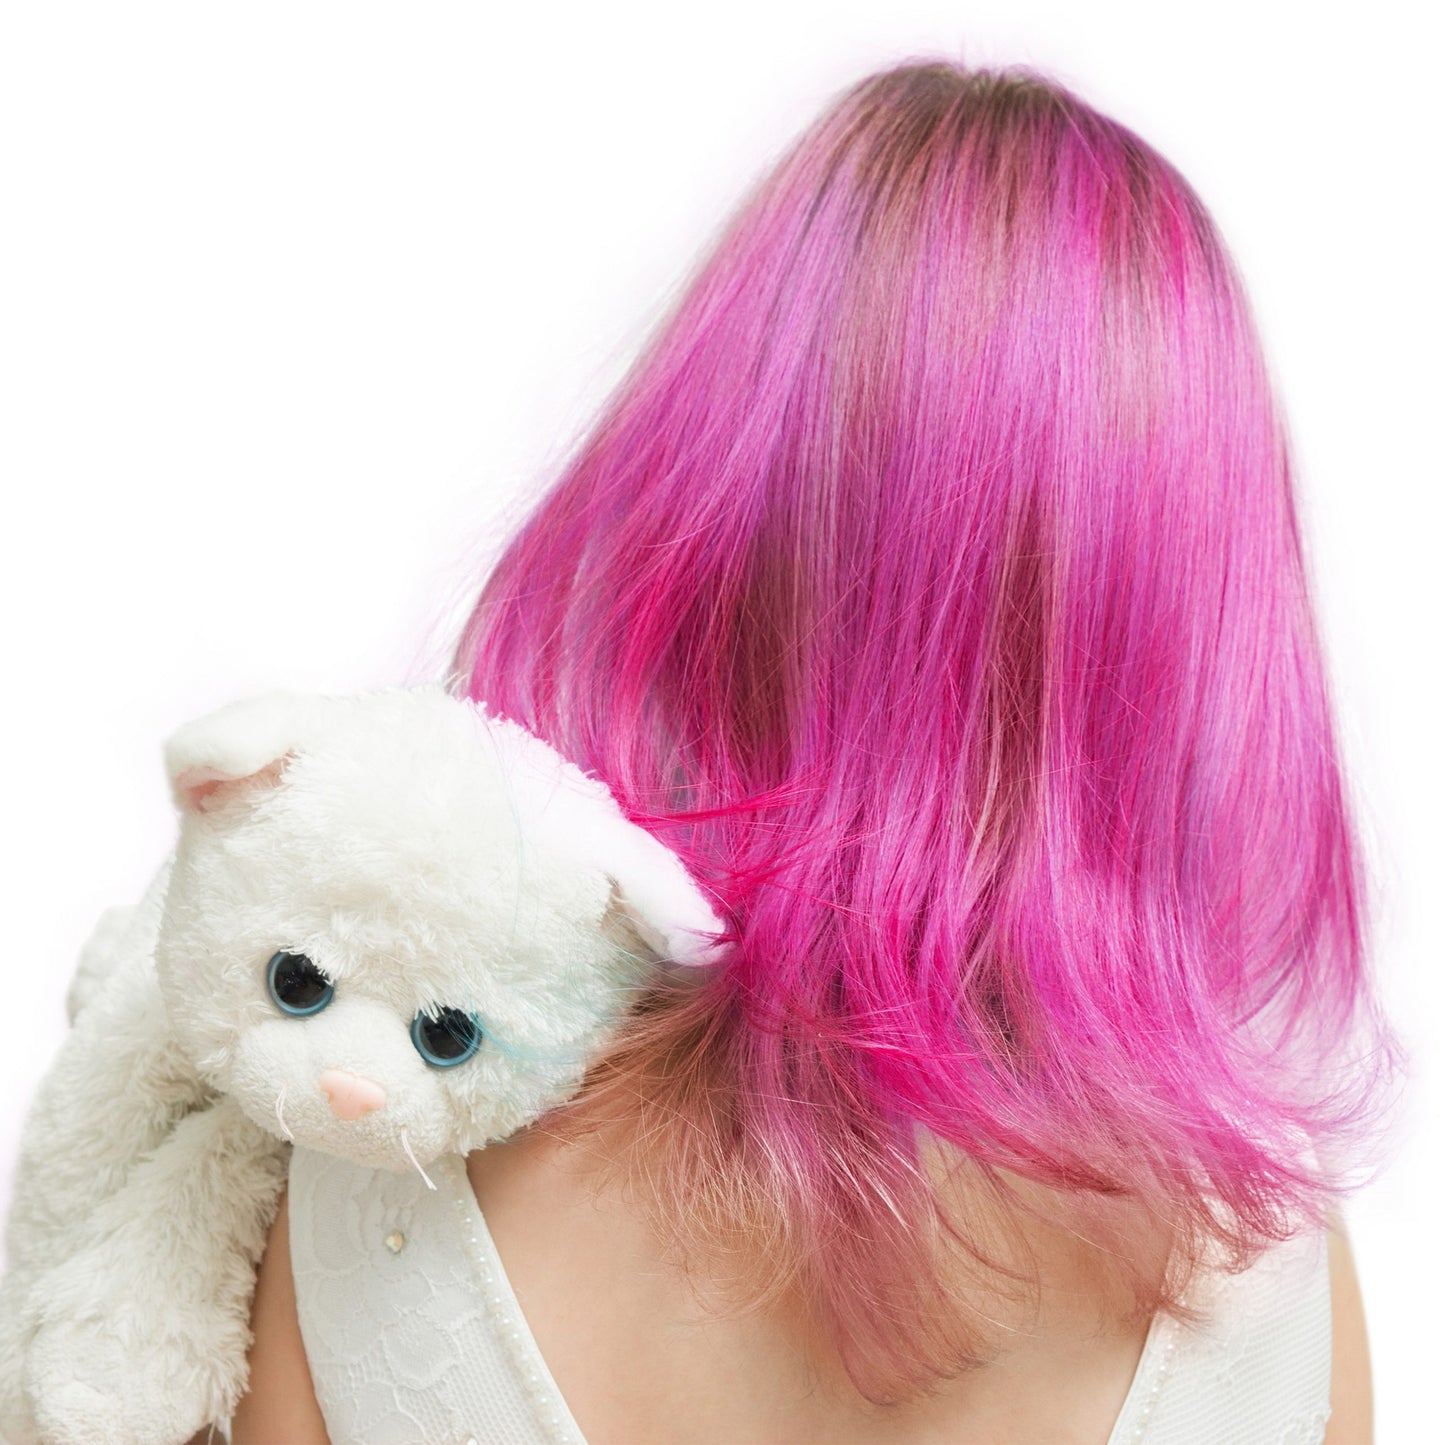 Color Me Pink - Hair Color & Conditioner - Hot Pink